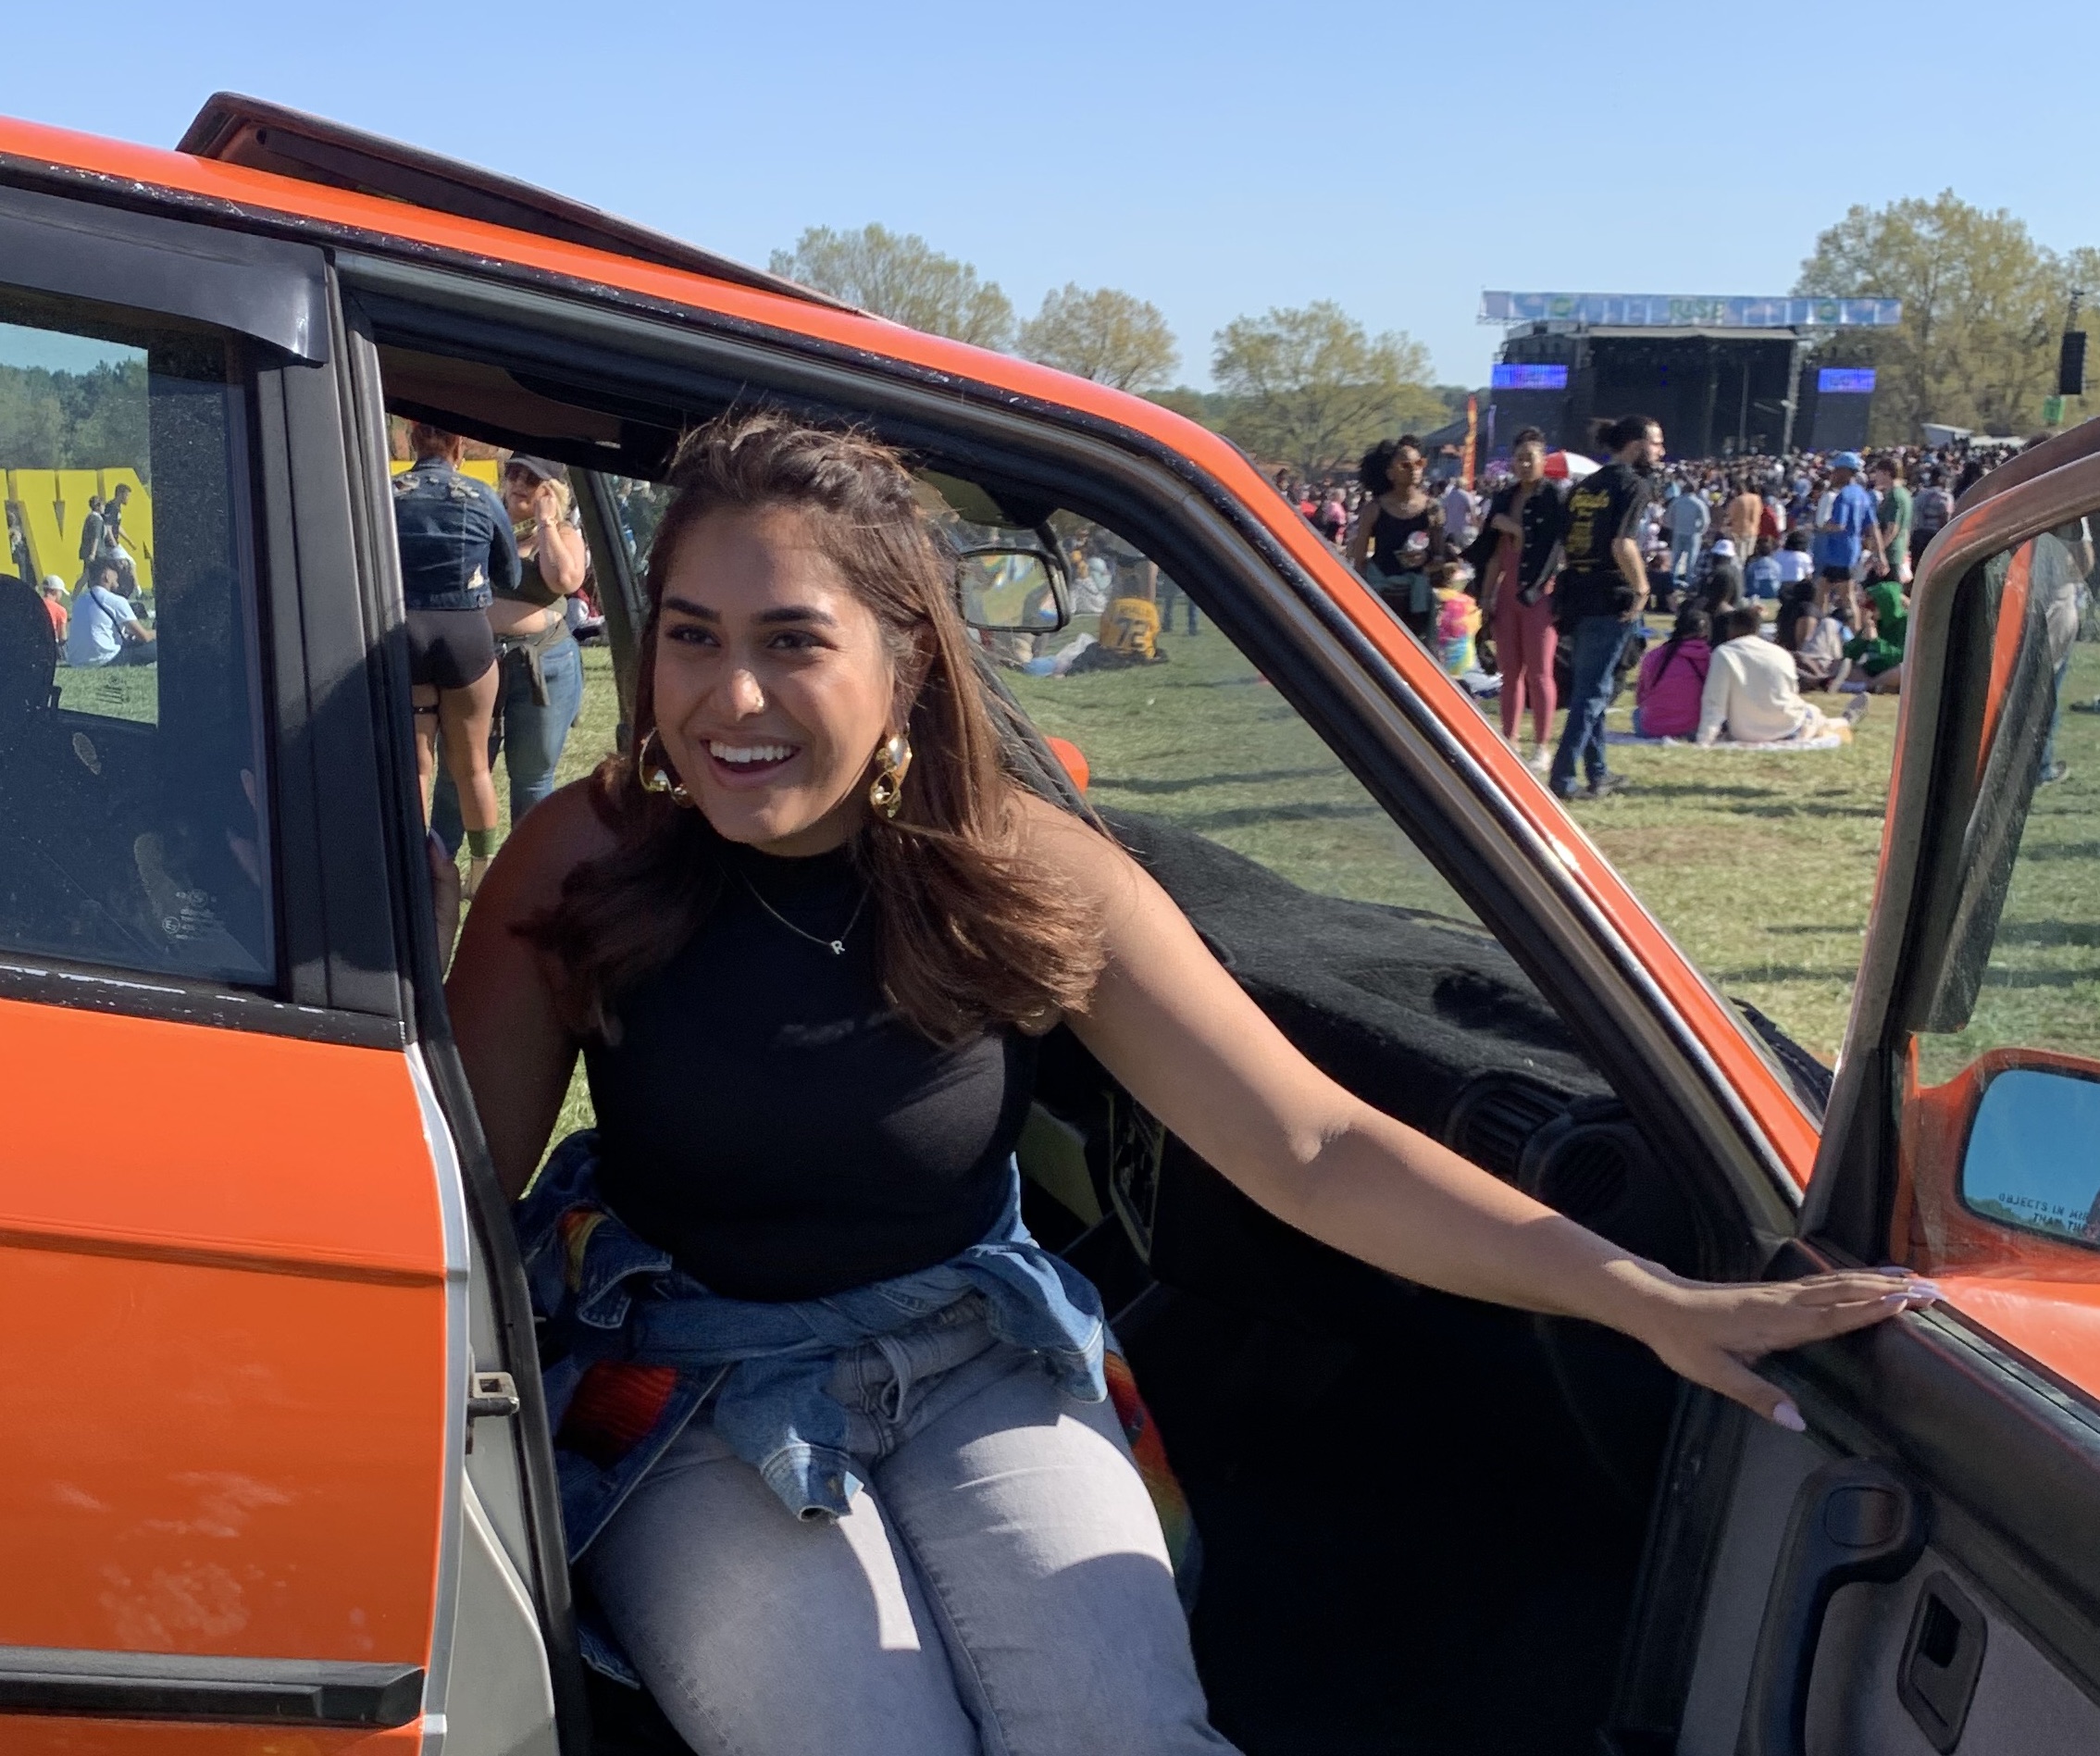 Mal sits in the passenger side of an orange retro car and smiles into the distance with flowers in the foreground and a music festival in the background